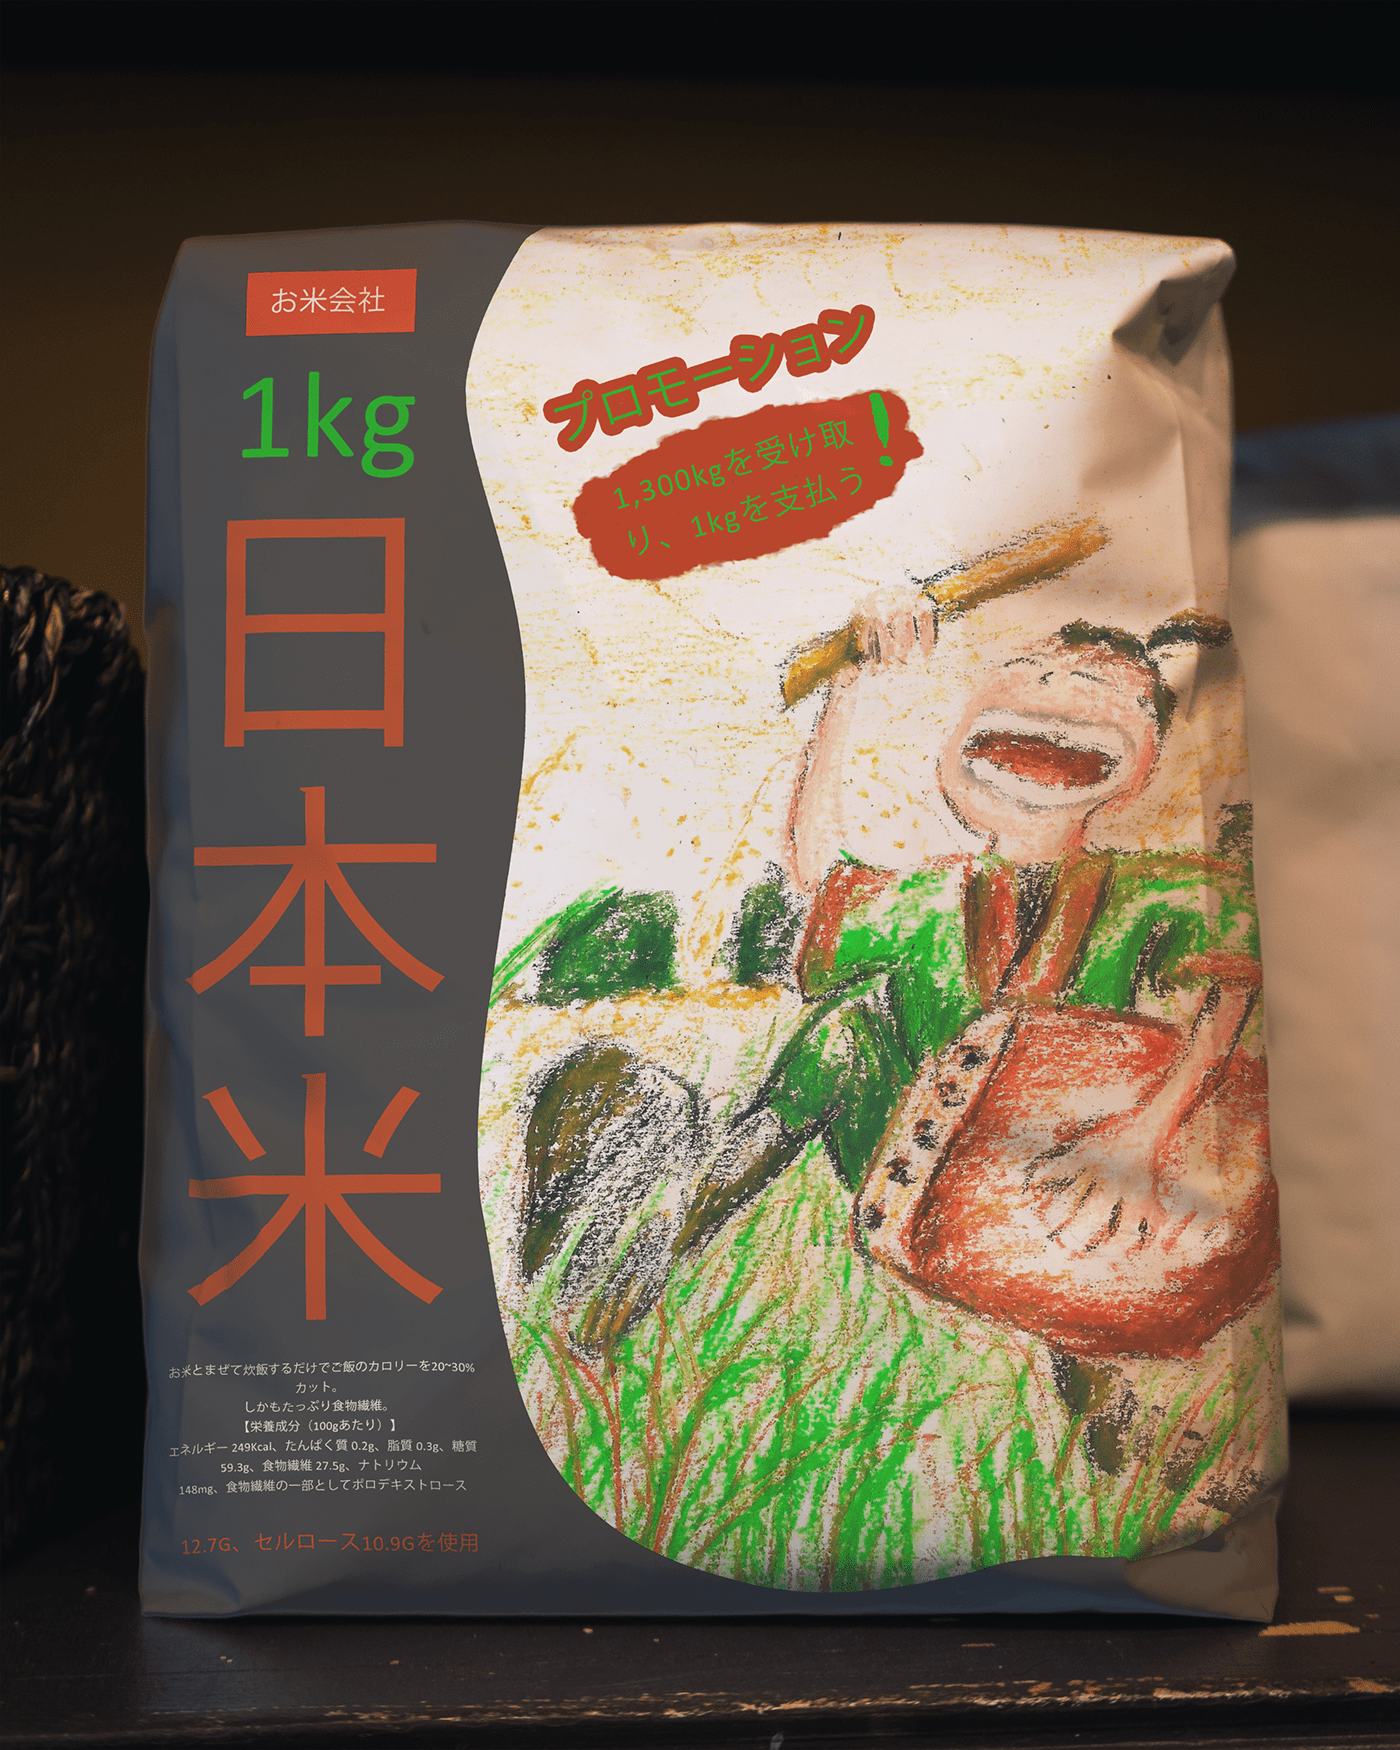 colorful oil pastel Rice Nature Packaging packaging illustration illustrations